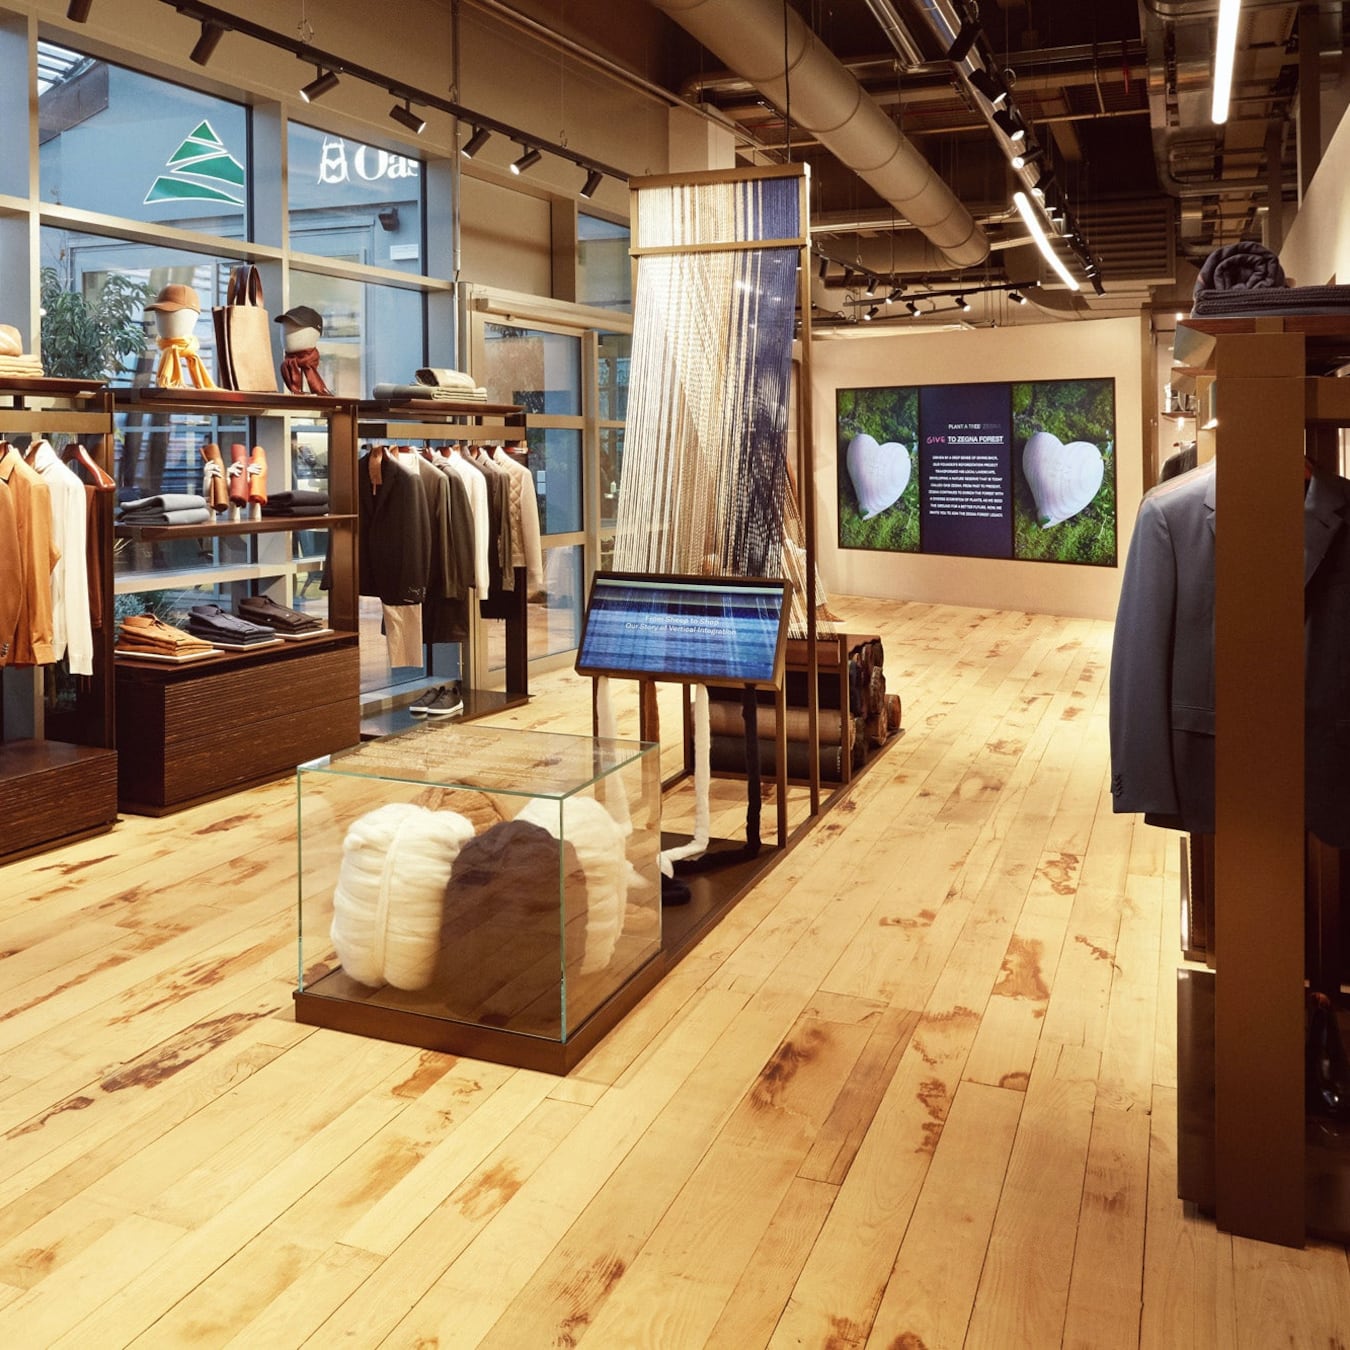 Project-Zegna partners with Green Pea to create a new shop-in-shop experience